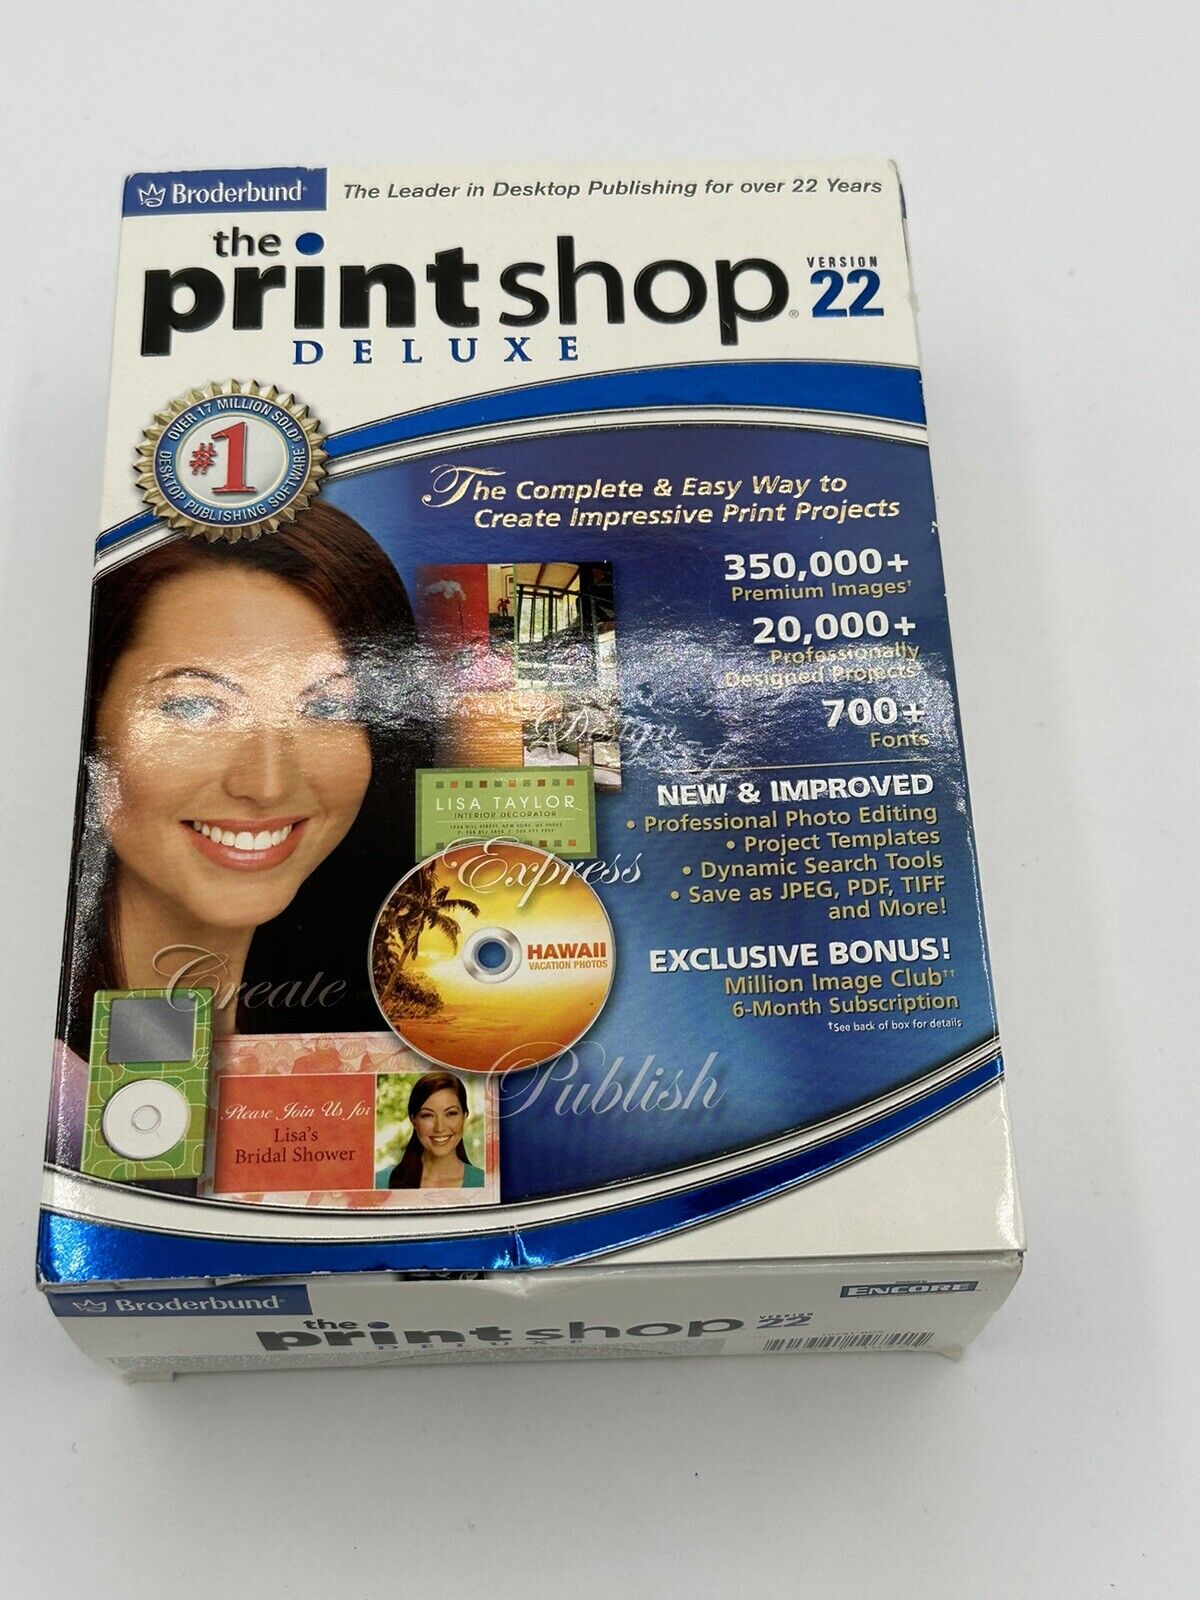 Broderbund The Print Shop Version 22 Deluxe Printing and Photo Editing.